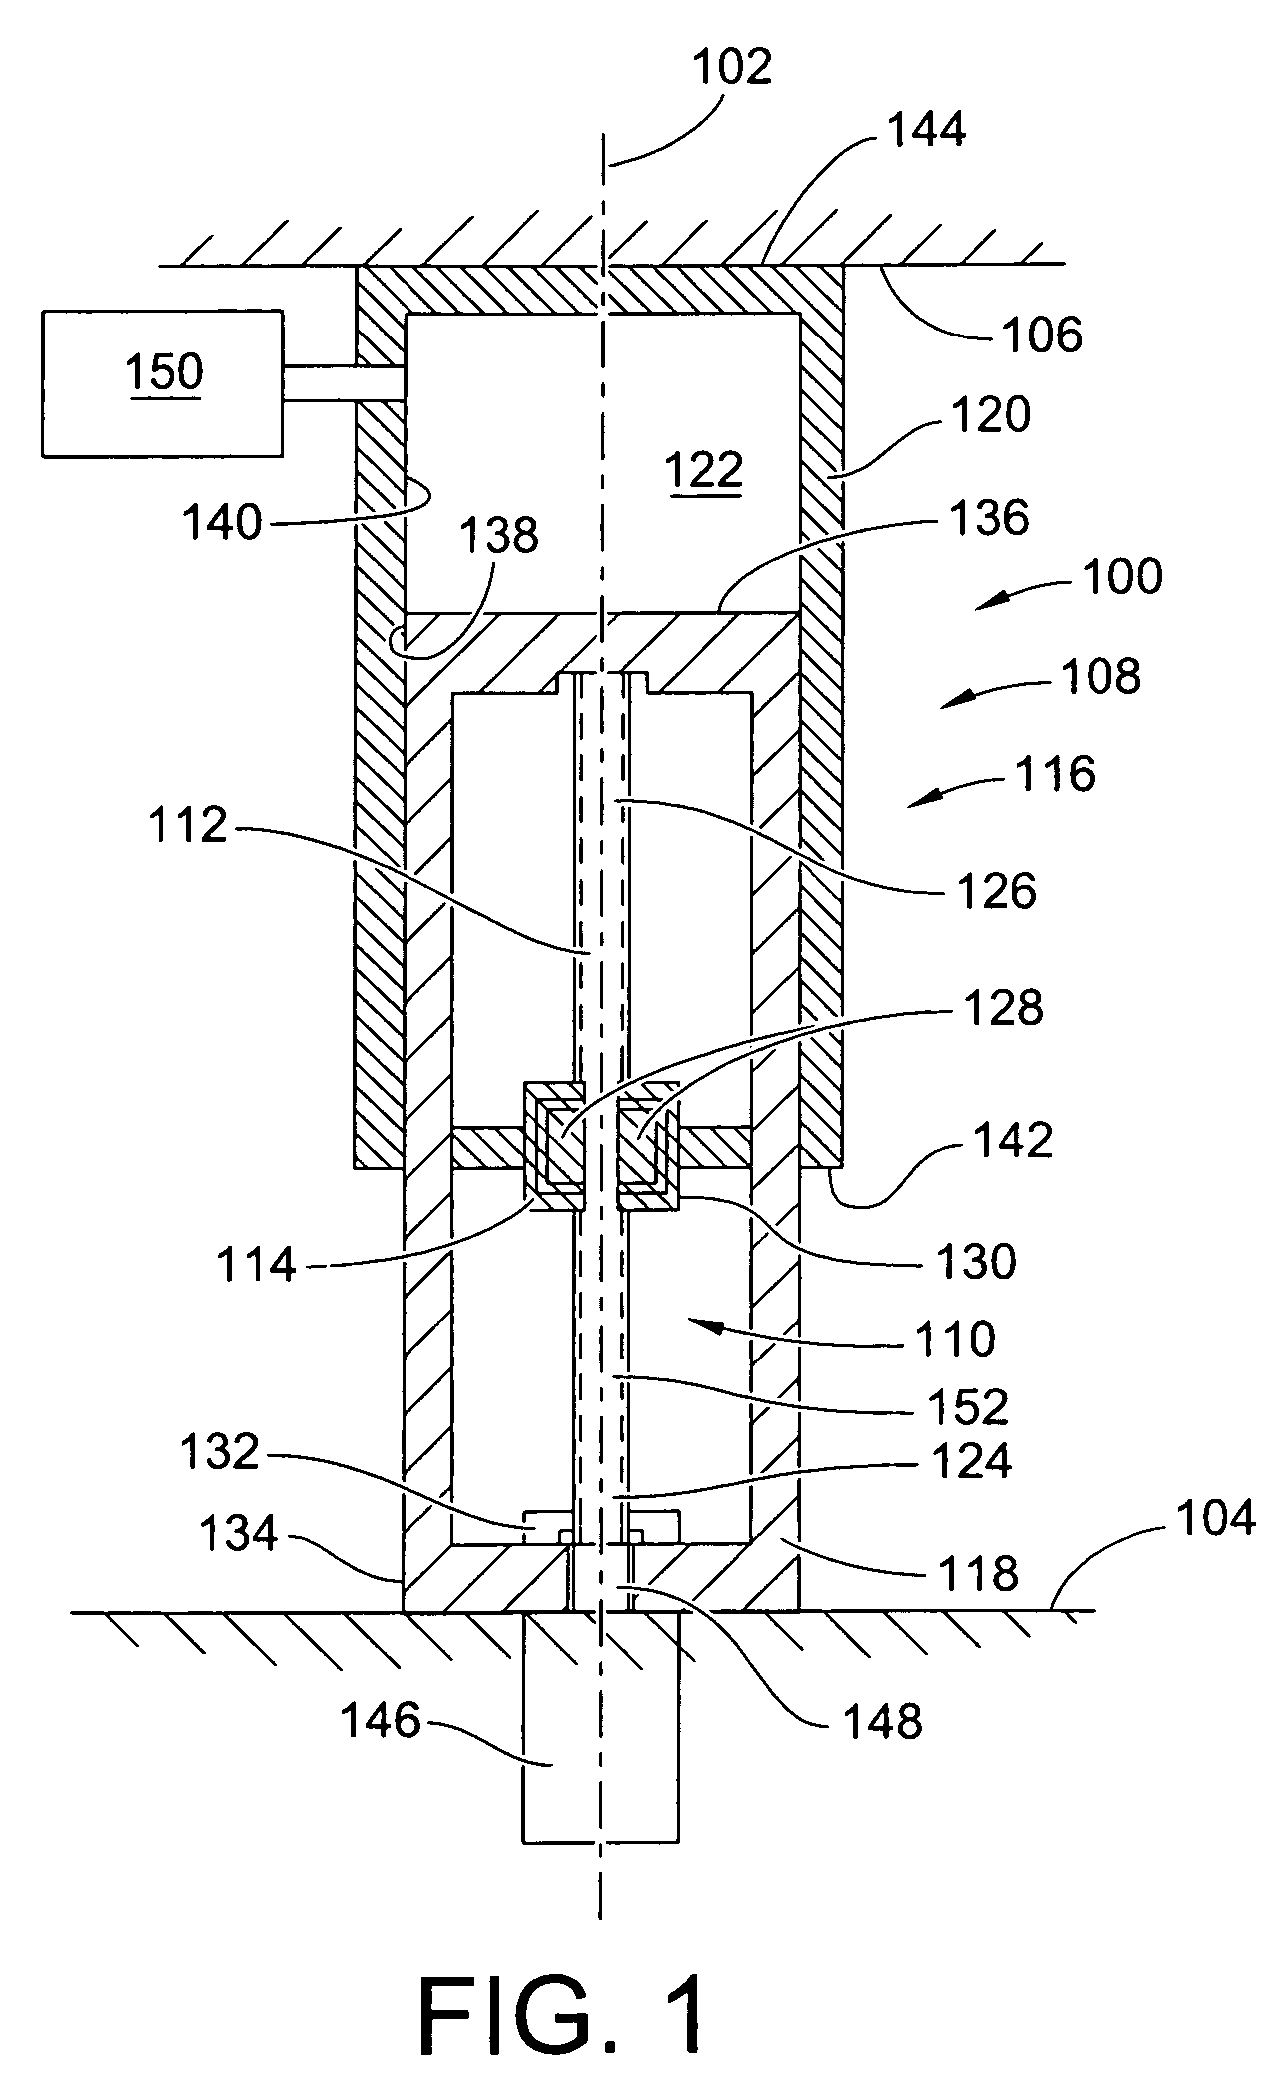 Pneumatic biasing of a linear actuator and implementations thereof